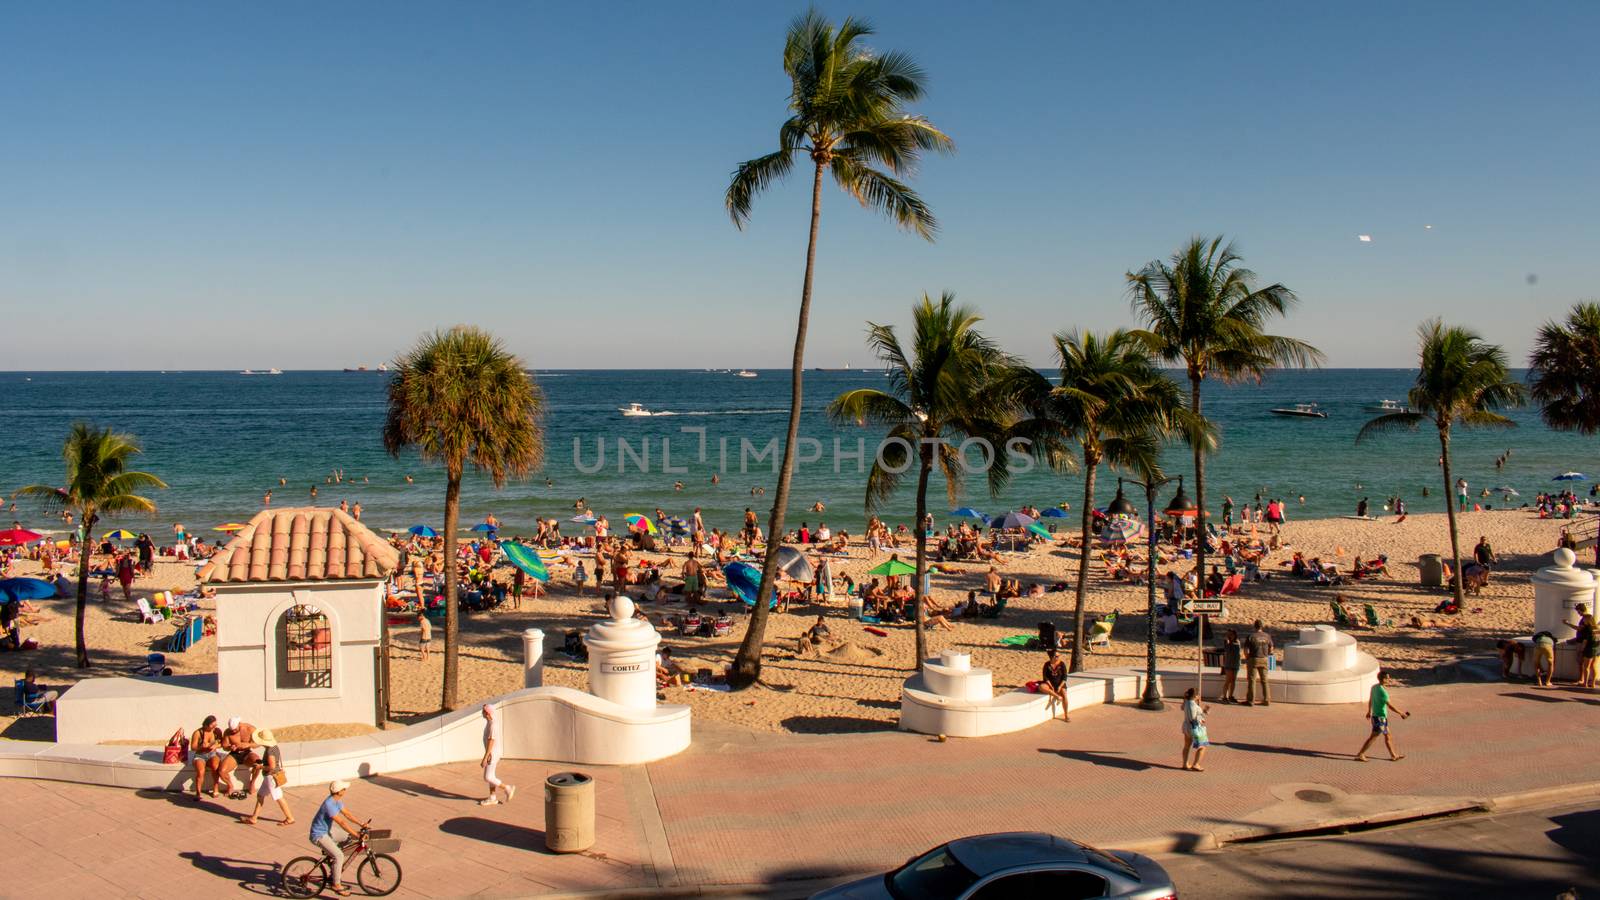 An Overhead View of a Busy Tropical Beach Scene by bju12290